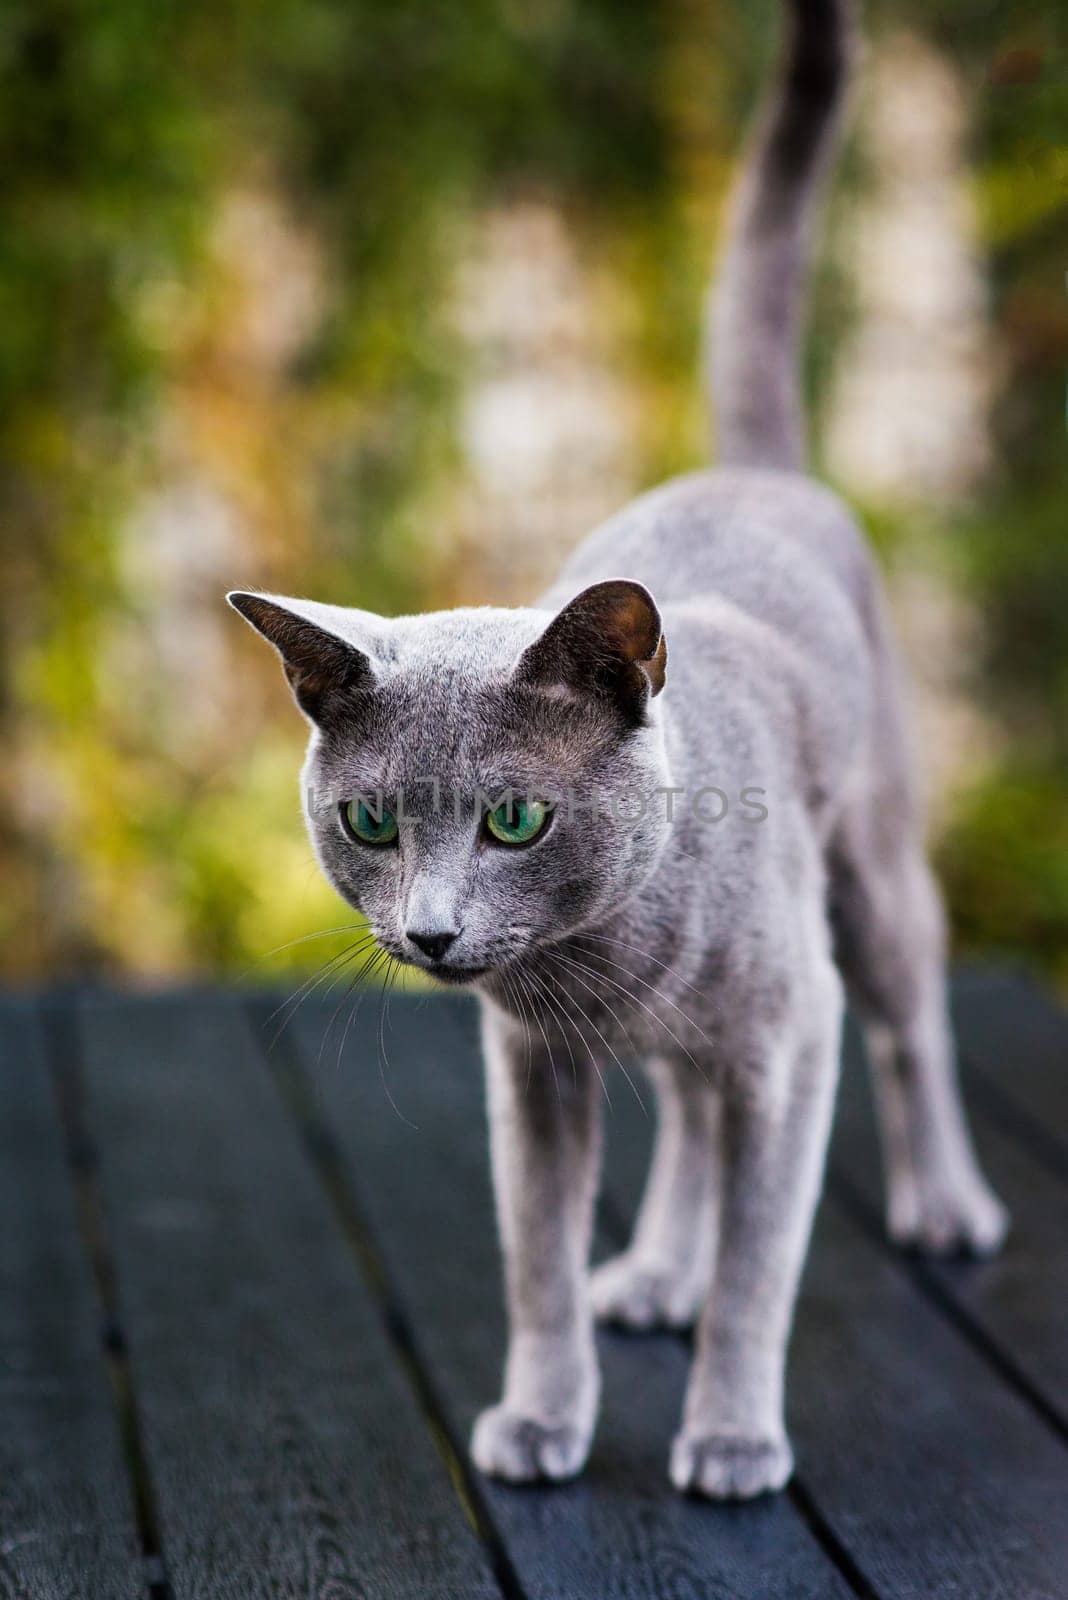 Blue cat sitting on wooden table with green background, sitting in the garden. by Zelenin